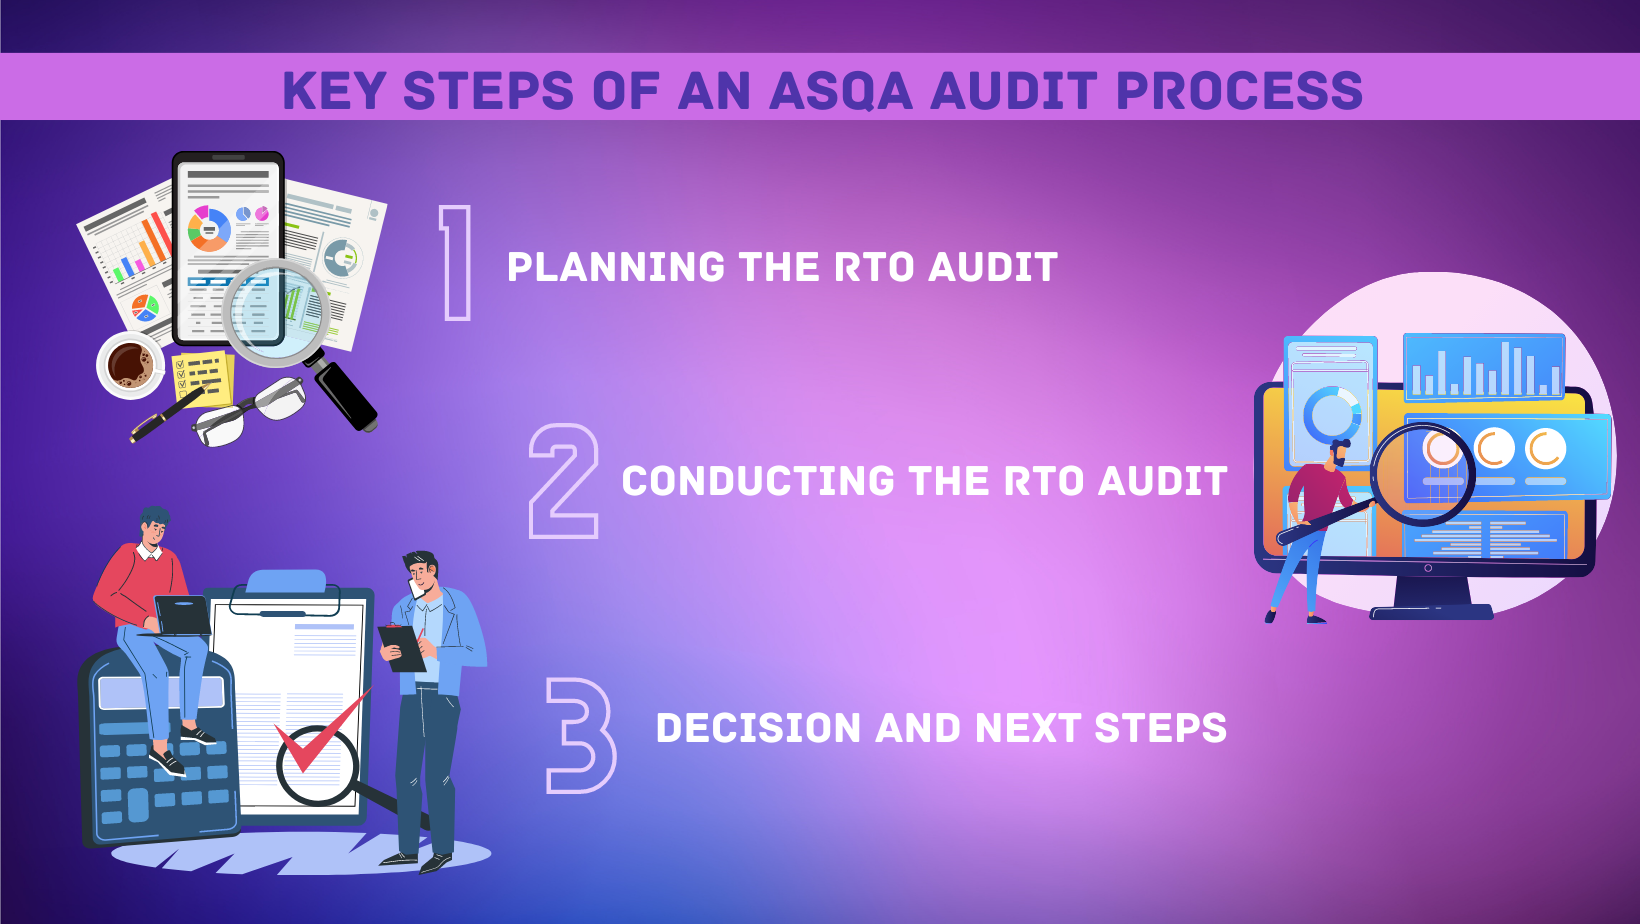 Planning the RTO Audit, Conducting the RTO Audit, Decision and Next Steps